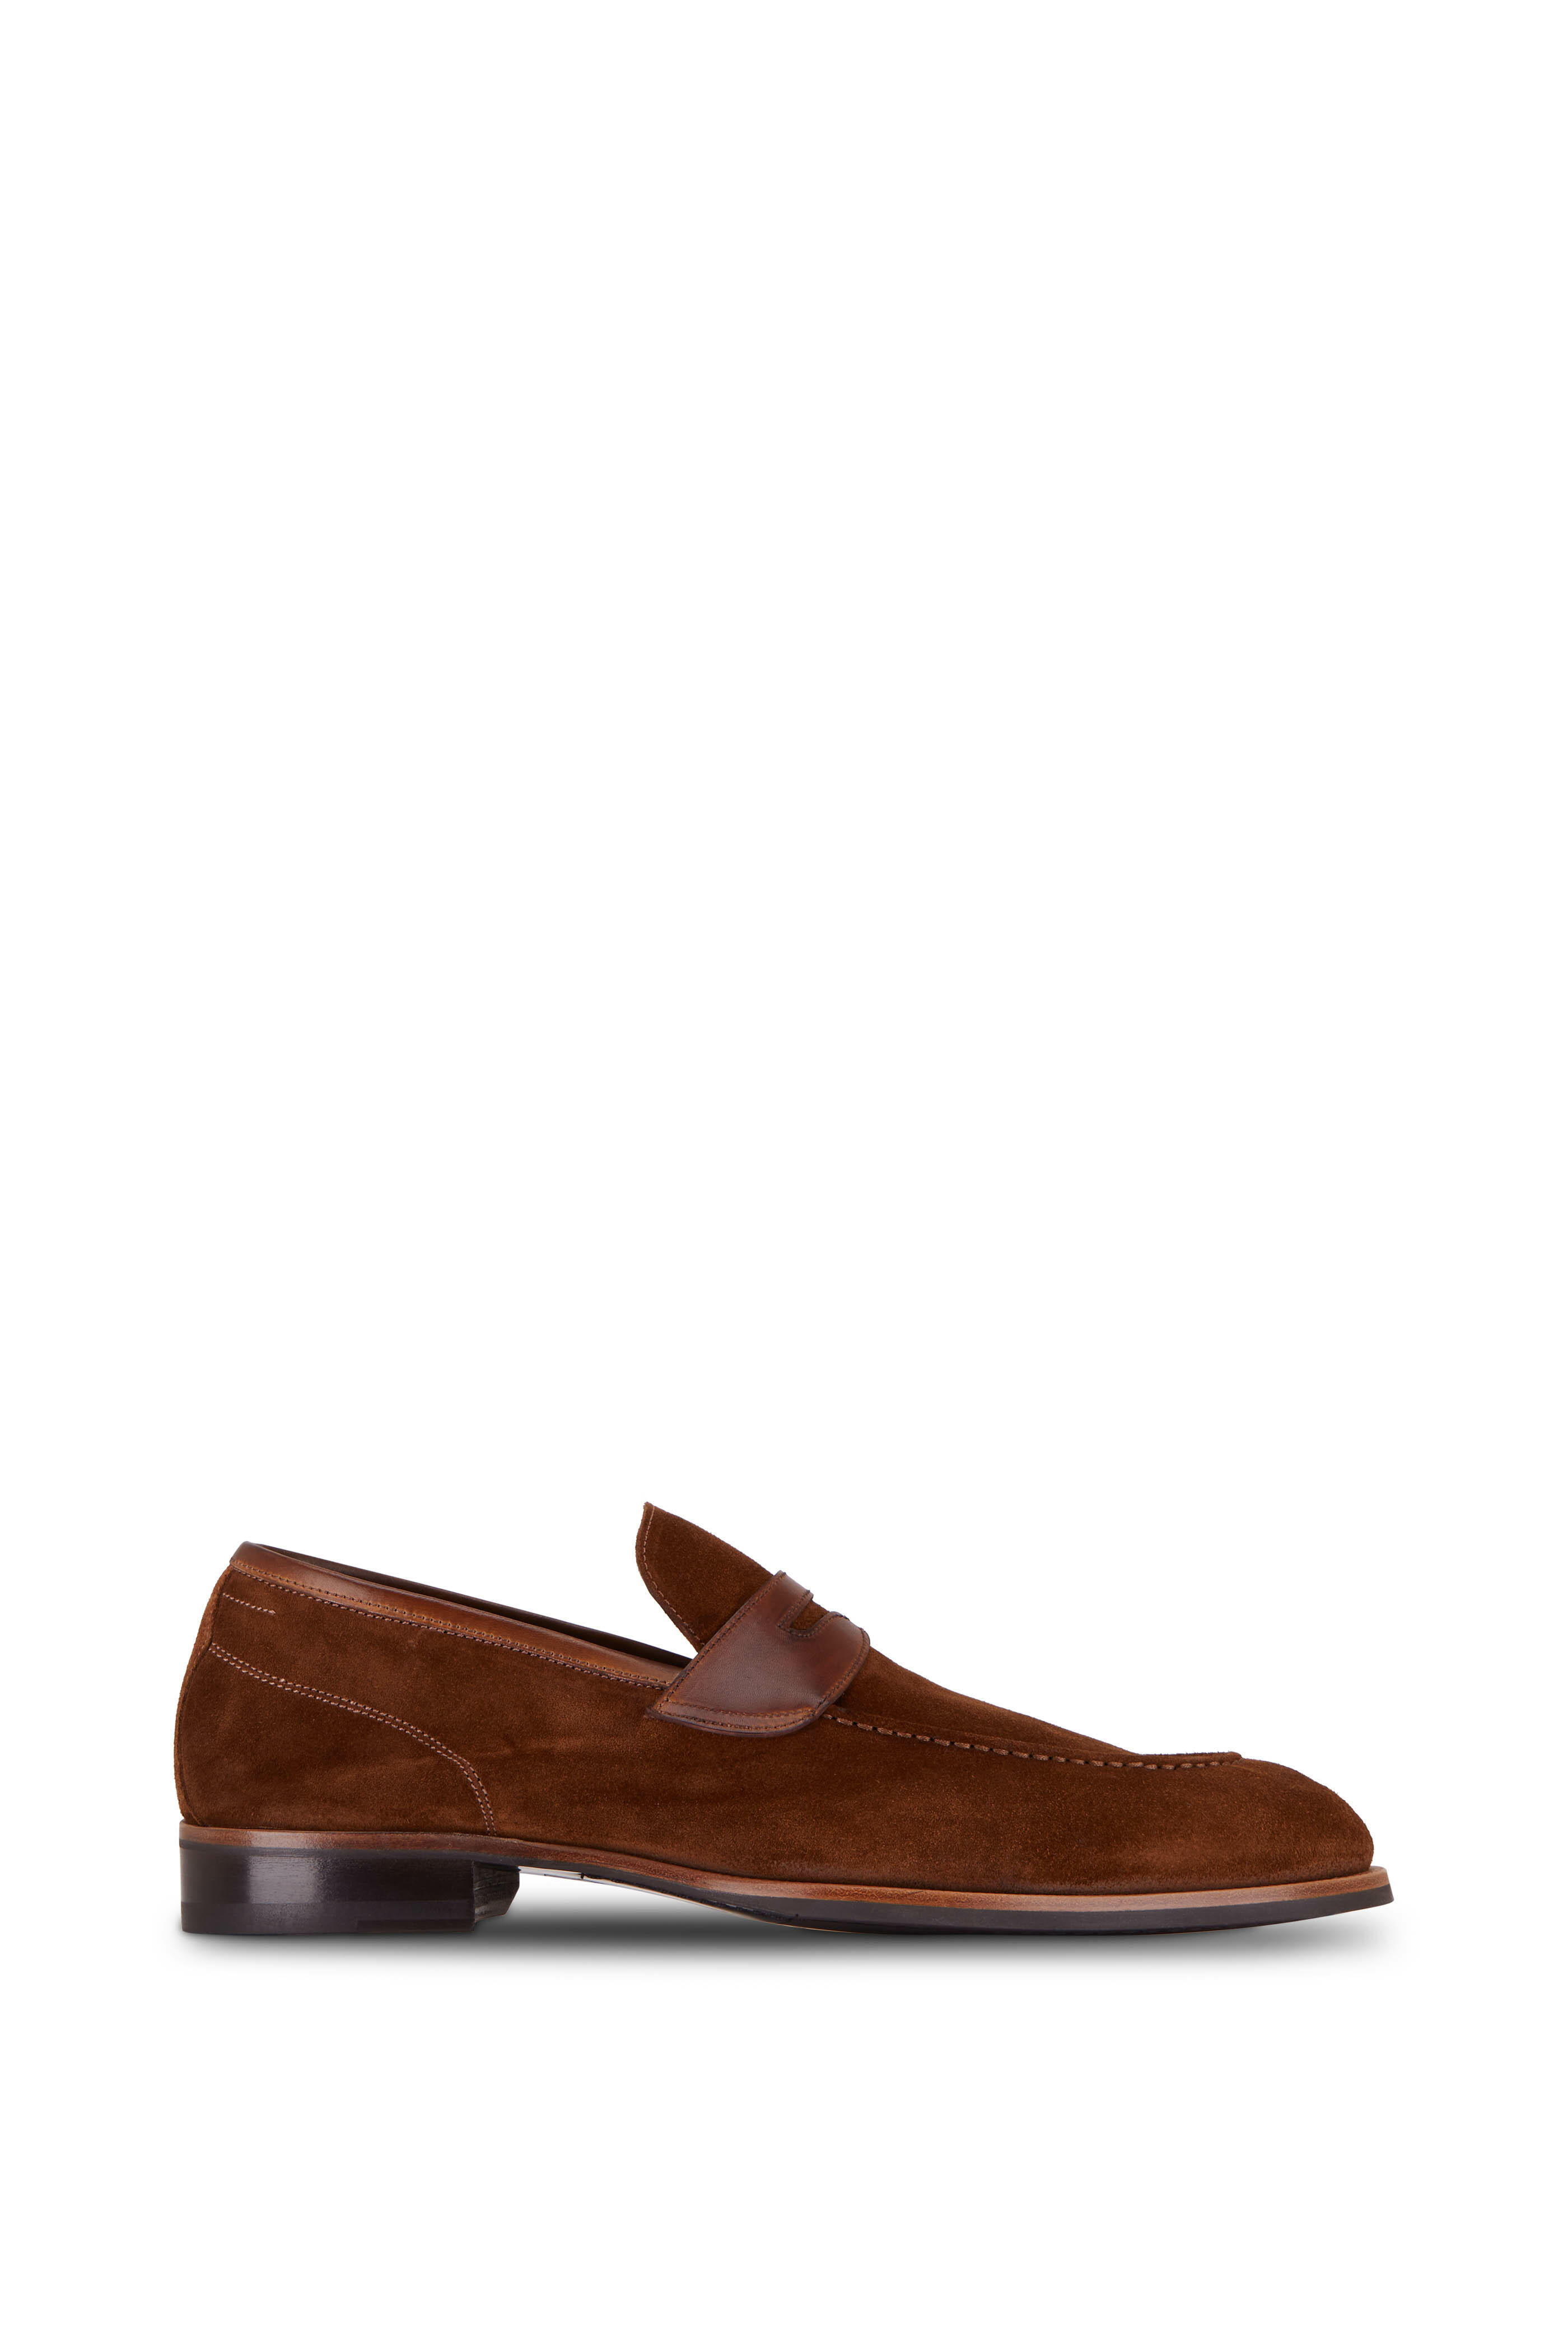 Di Bianco - Brera Brown Suede Loafers | Mitchell Stores